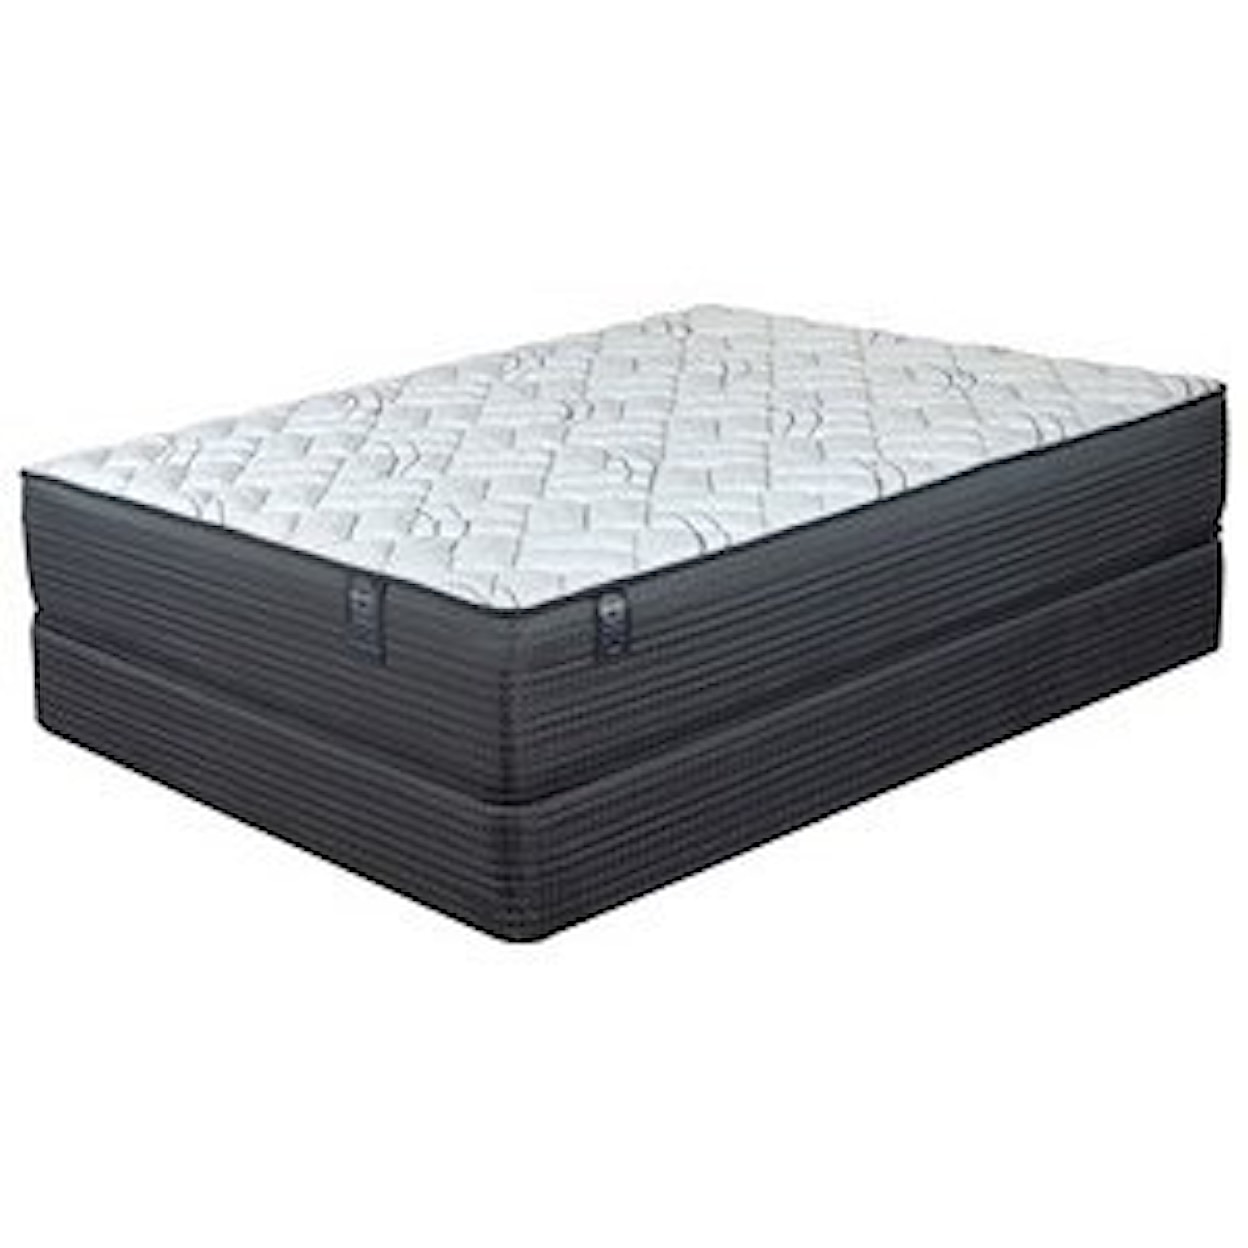 Restonic Duvall Firm Full 14" Firm Two Sided Mattress Set